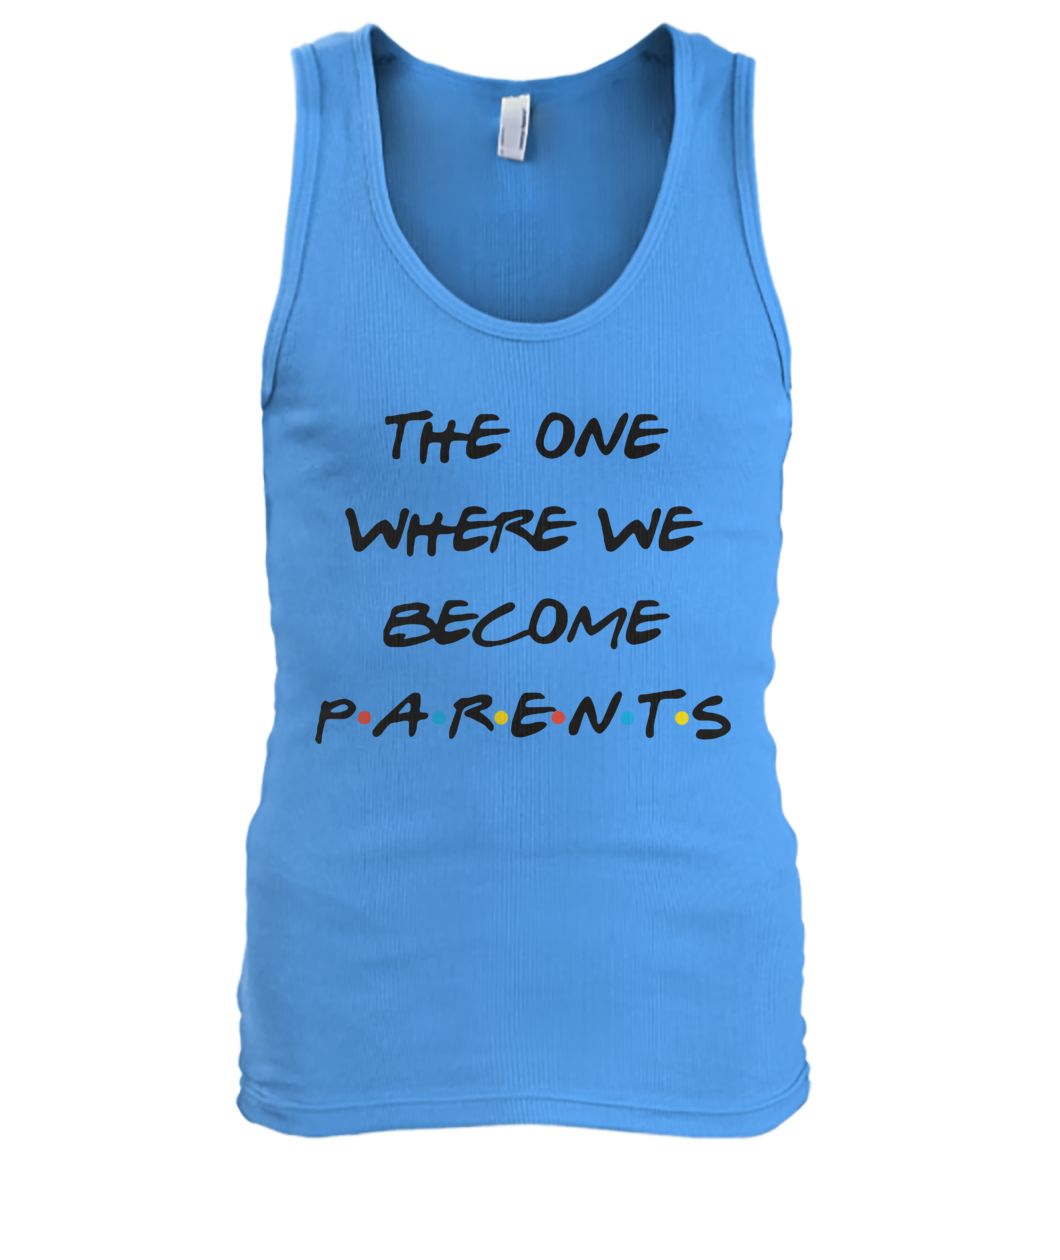 Friend tv show the one where we become parents men's tank top